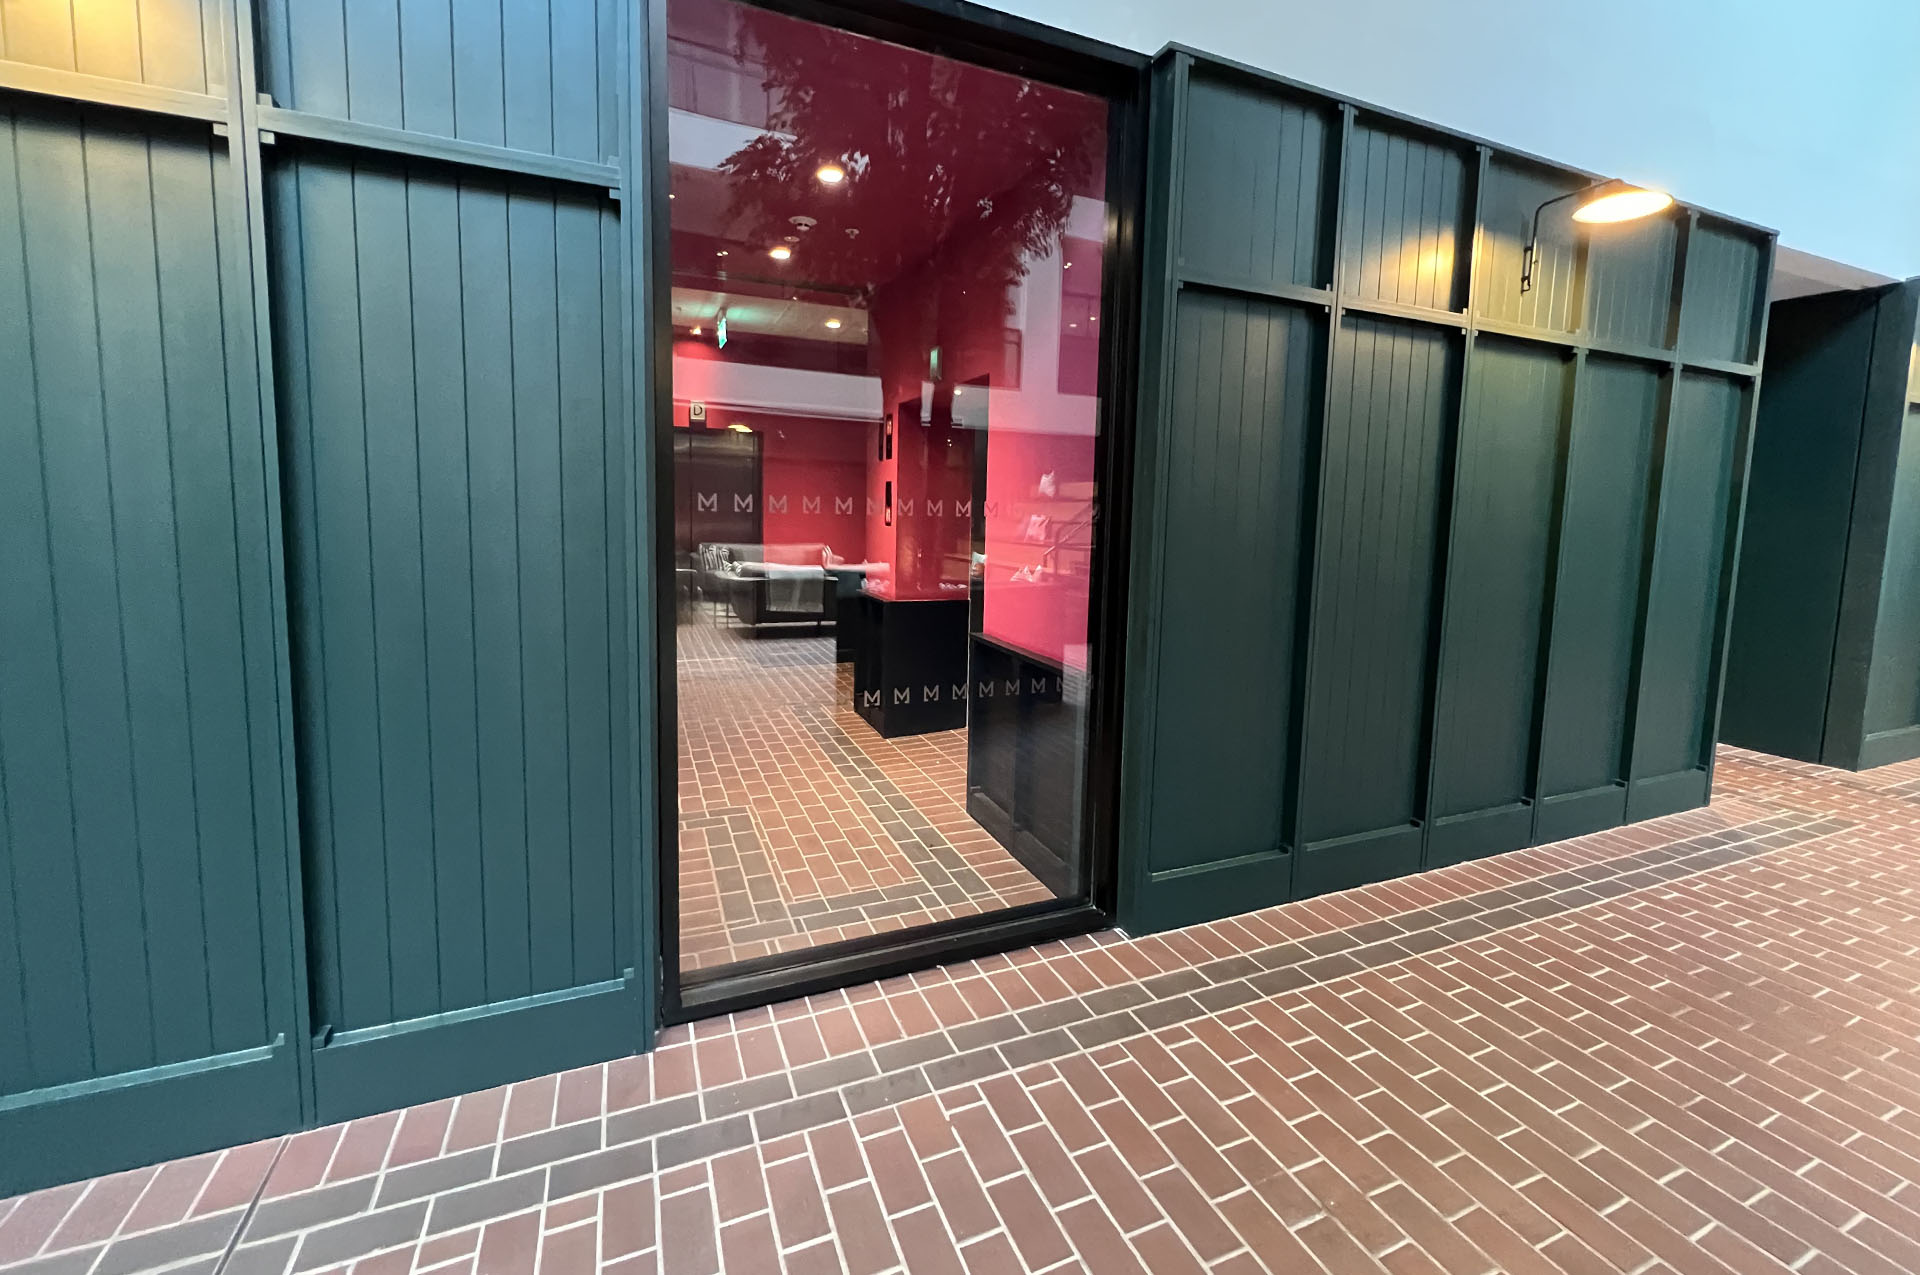 Brown brindle rectangular quarry tiles specified by Naomi Cleaver Designs at The Mercian in Birmingham